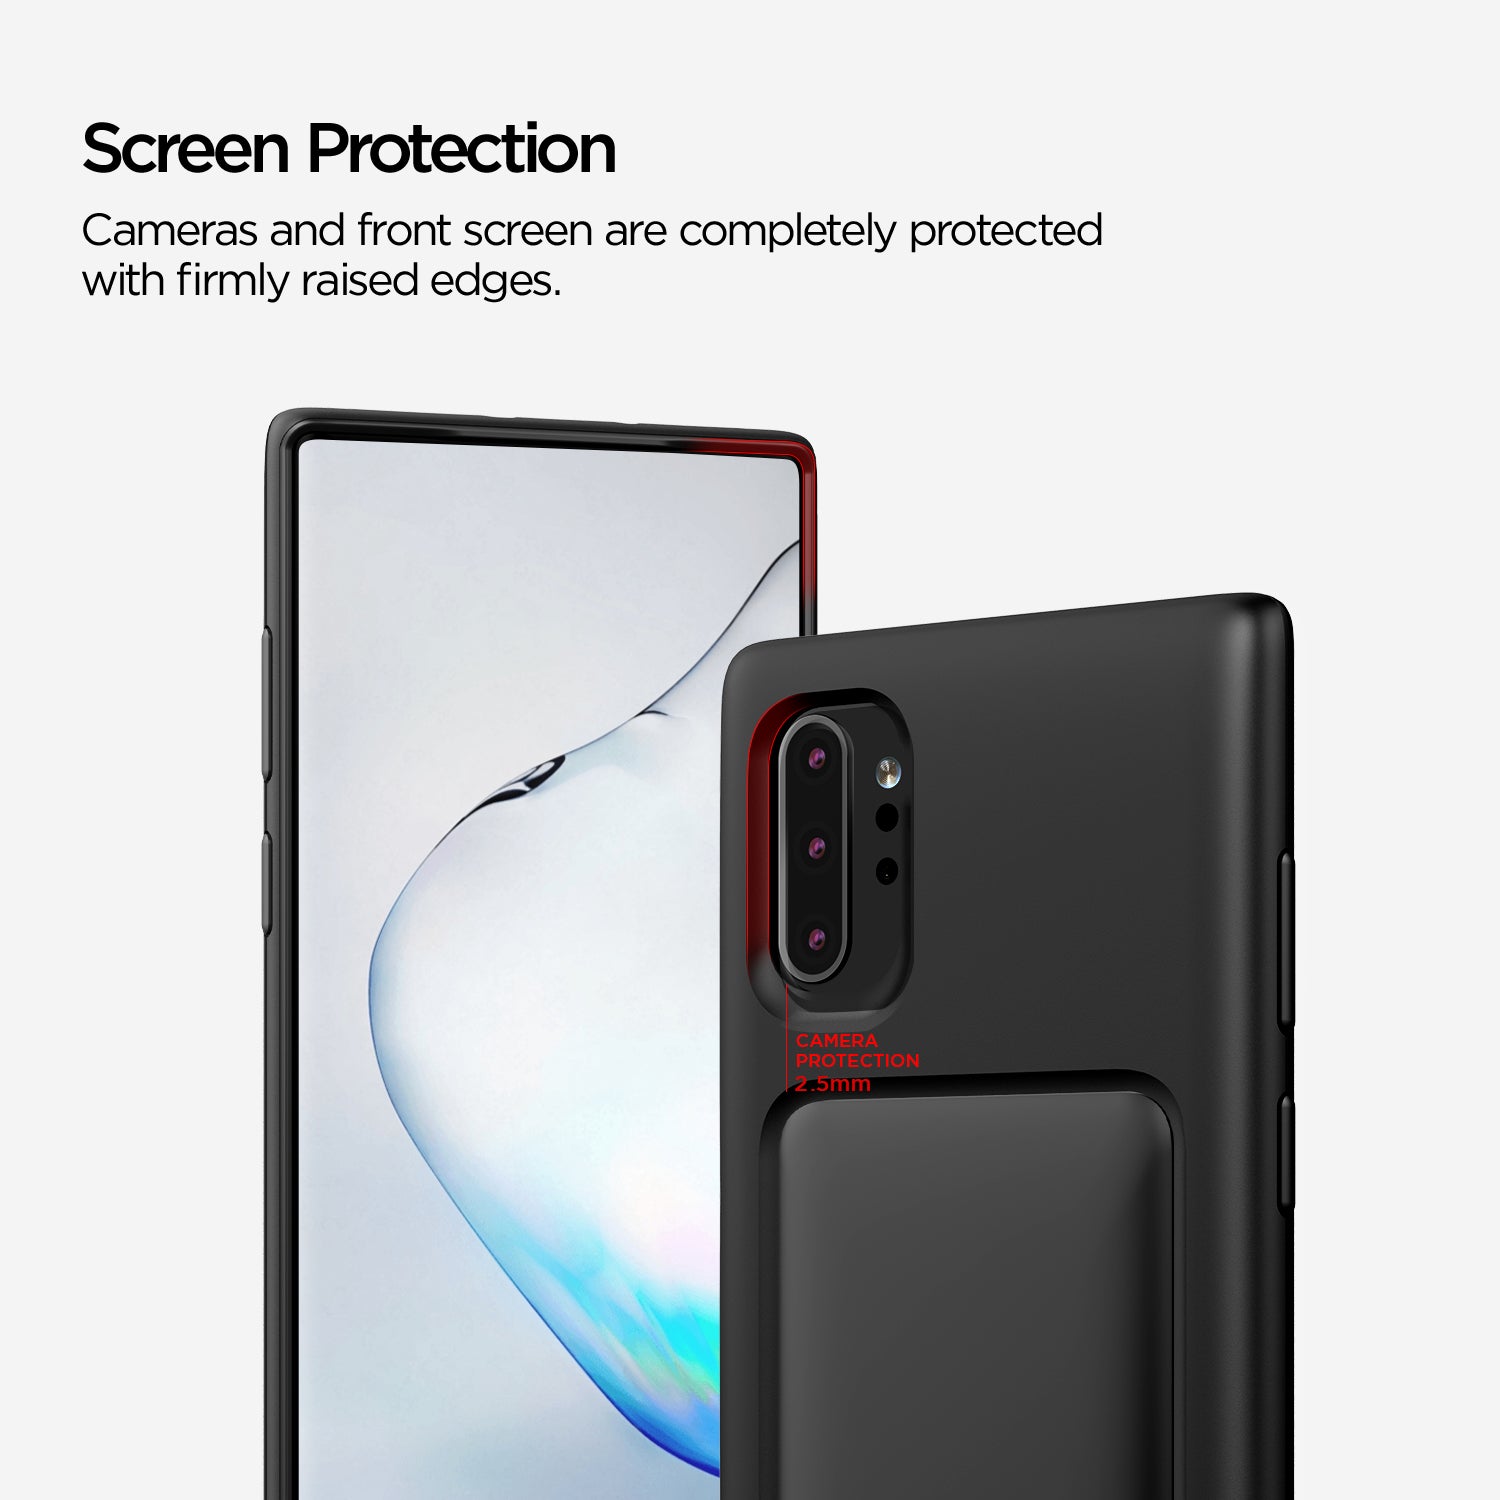 Samsung Galaxy Note 10 High quality TPU material for extreme drop protection with shockproof